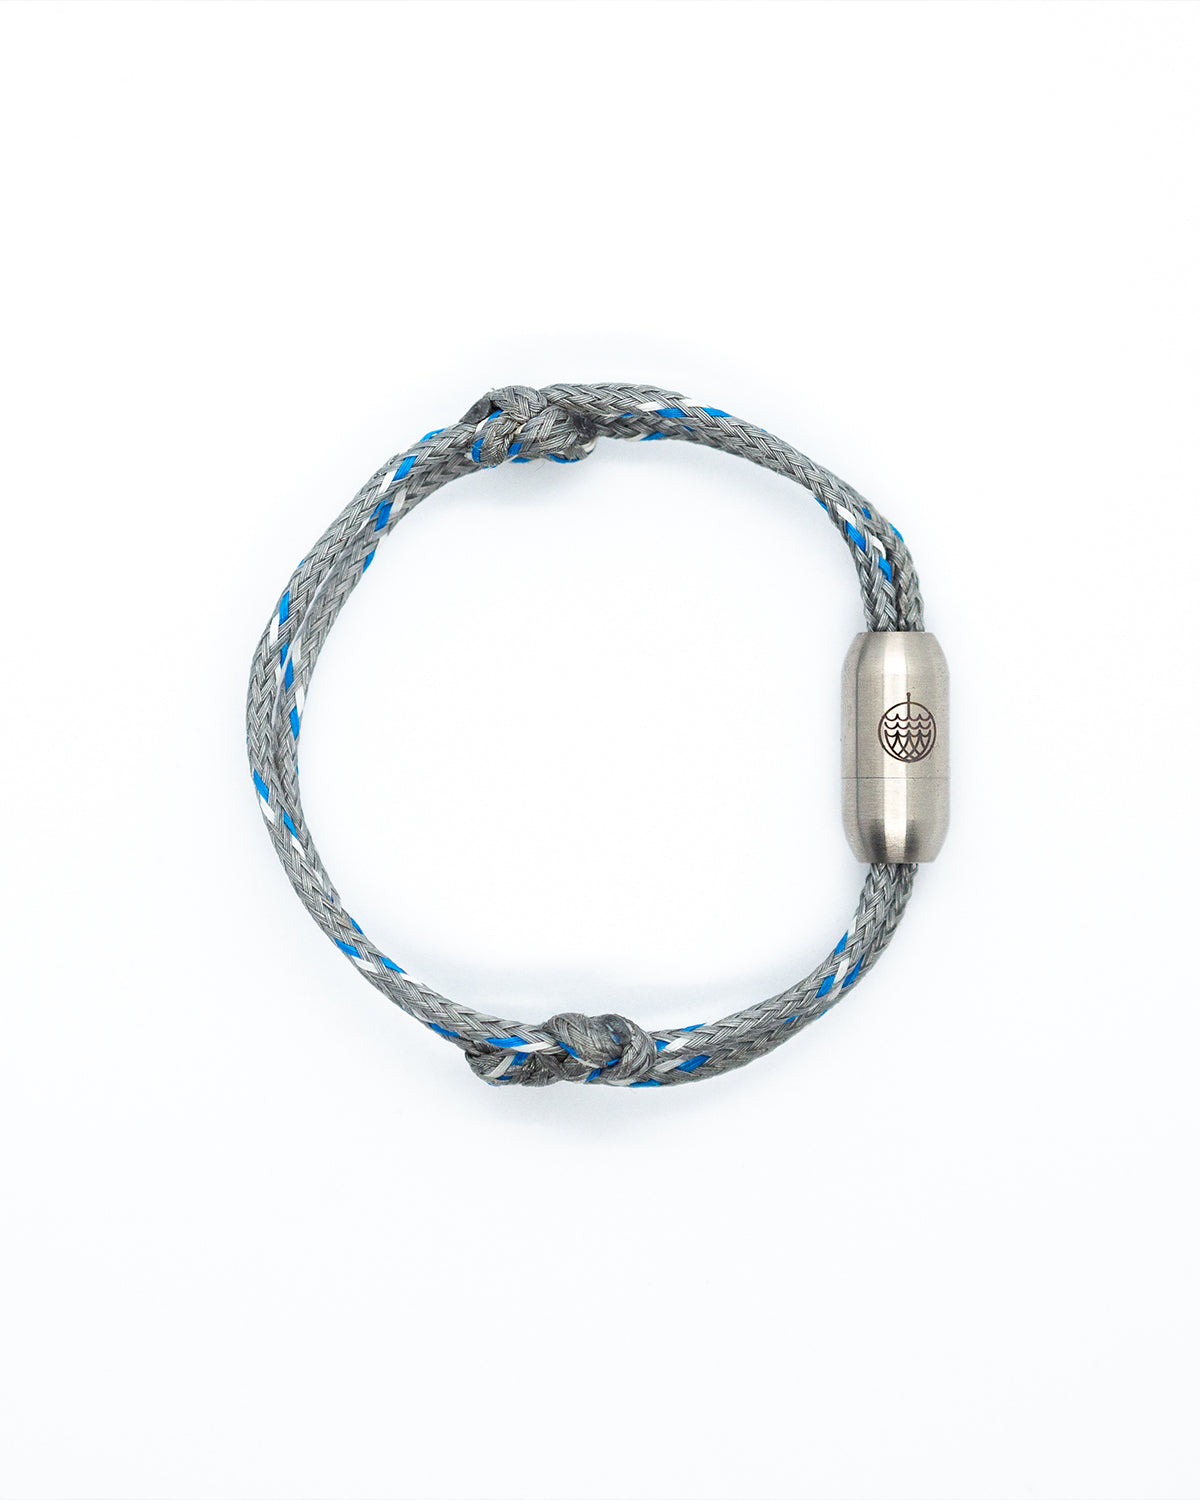 Bracelet in color grey with blue and white high lights and a silver clasp by Bracenet